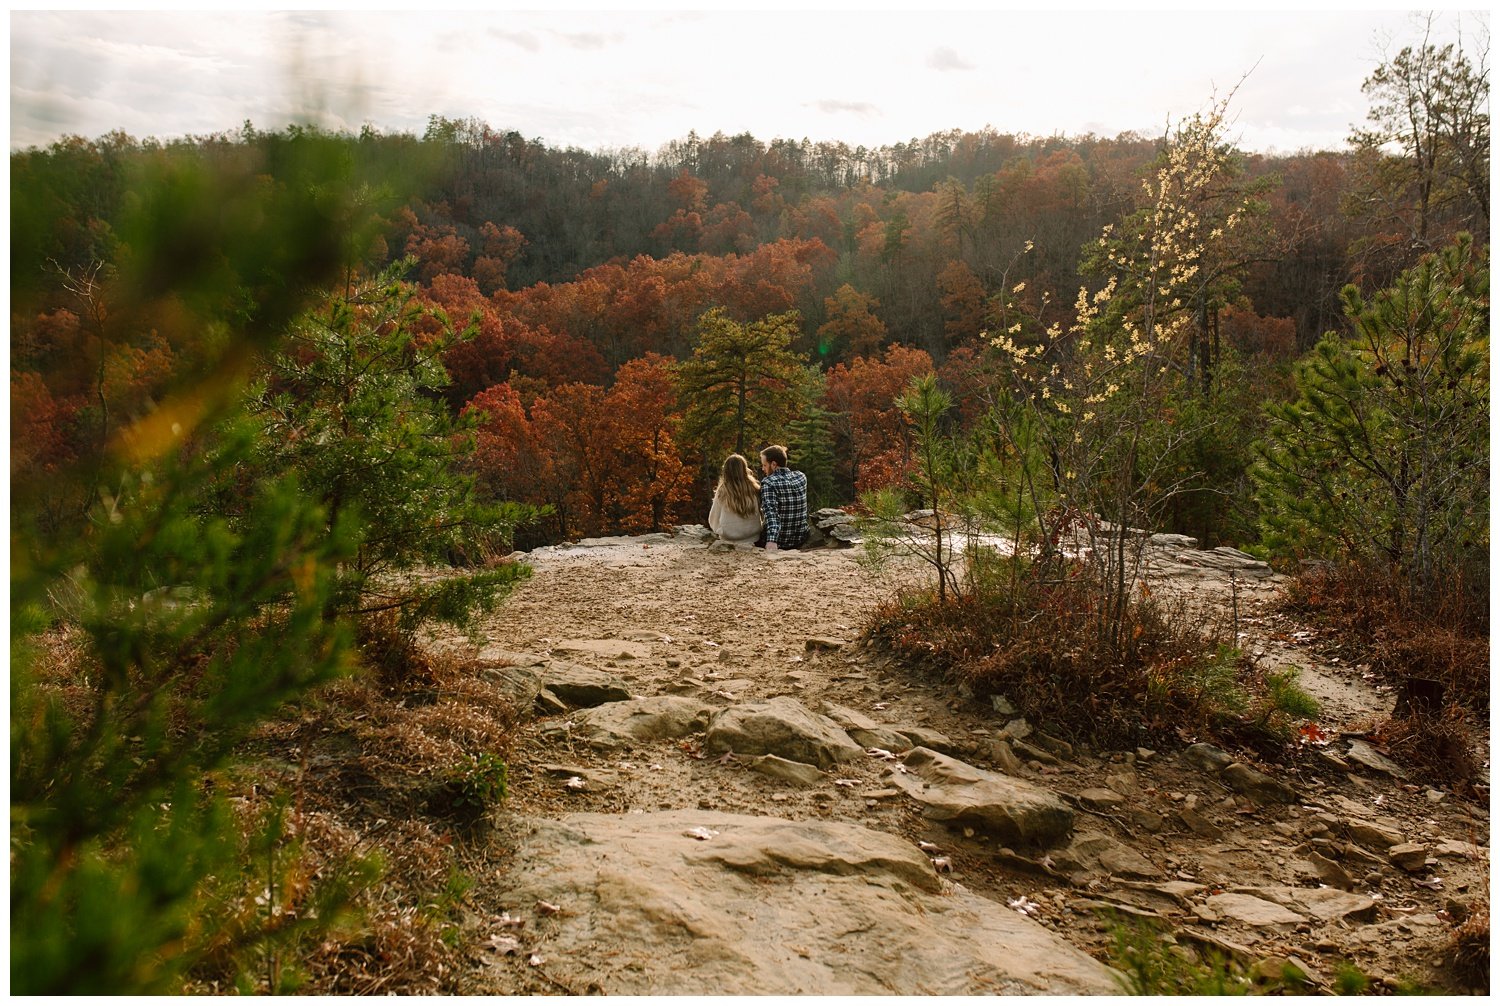 kendra_Farris_photography_red_river_gorge_photographer_proposal_engagement_elopement-54.jpg